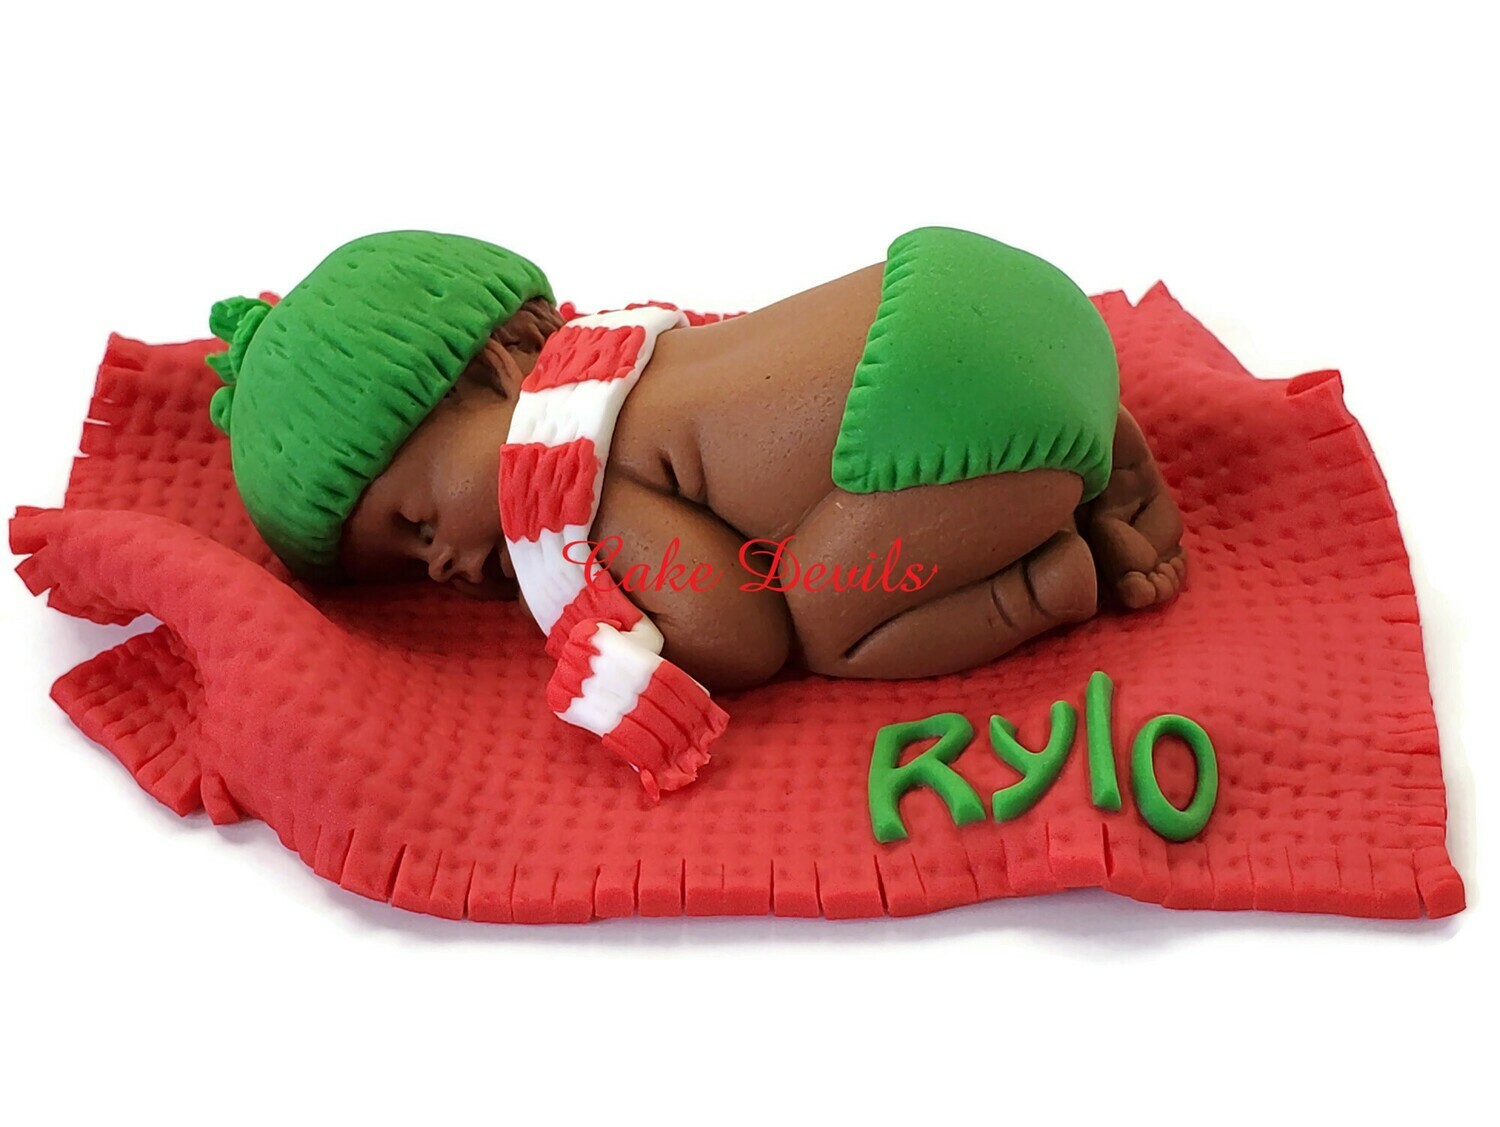 Christmas Baby Shower Cake Topper, the grinch, perfect for the holidays!